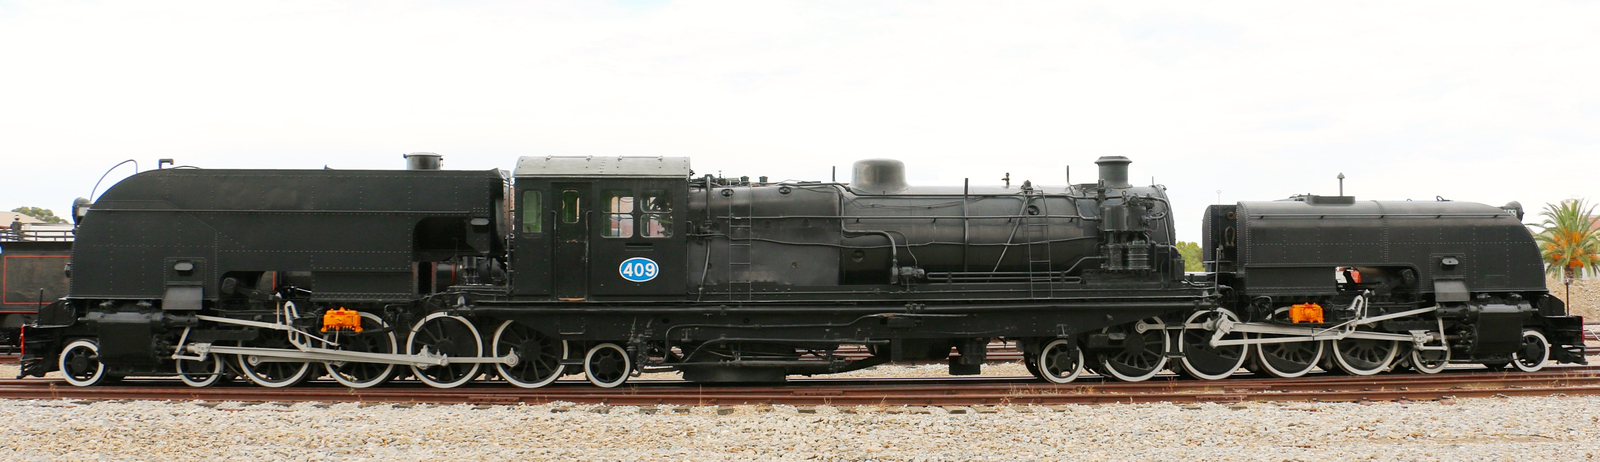 Side view of No. 409 at the National Railway Museum, Port Adelaide